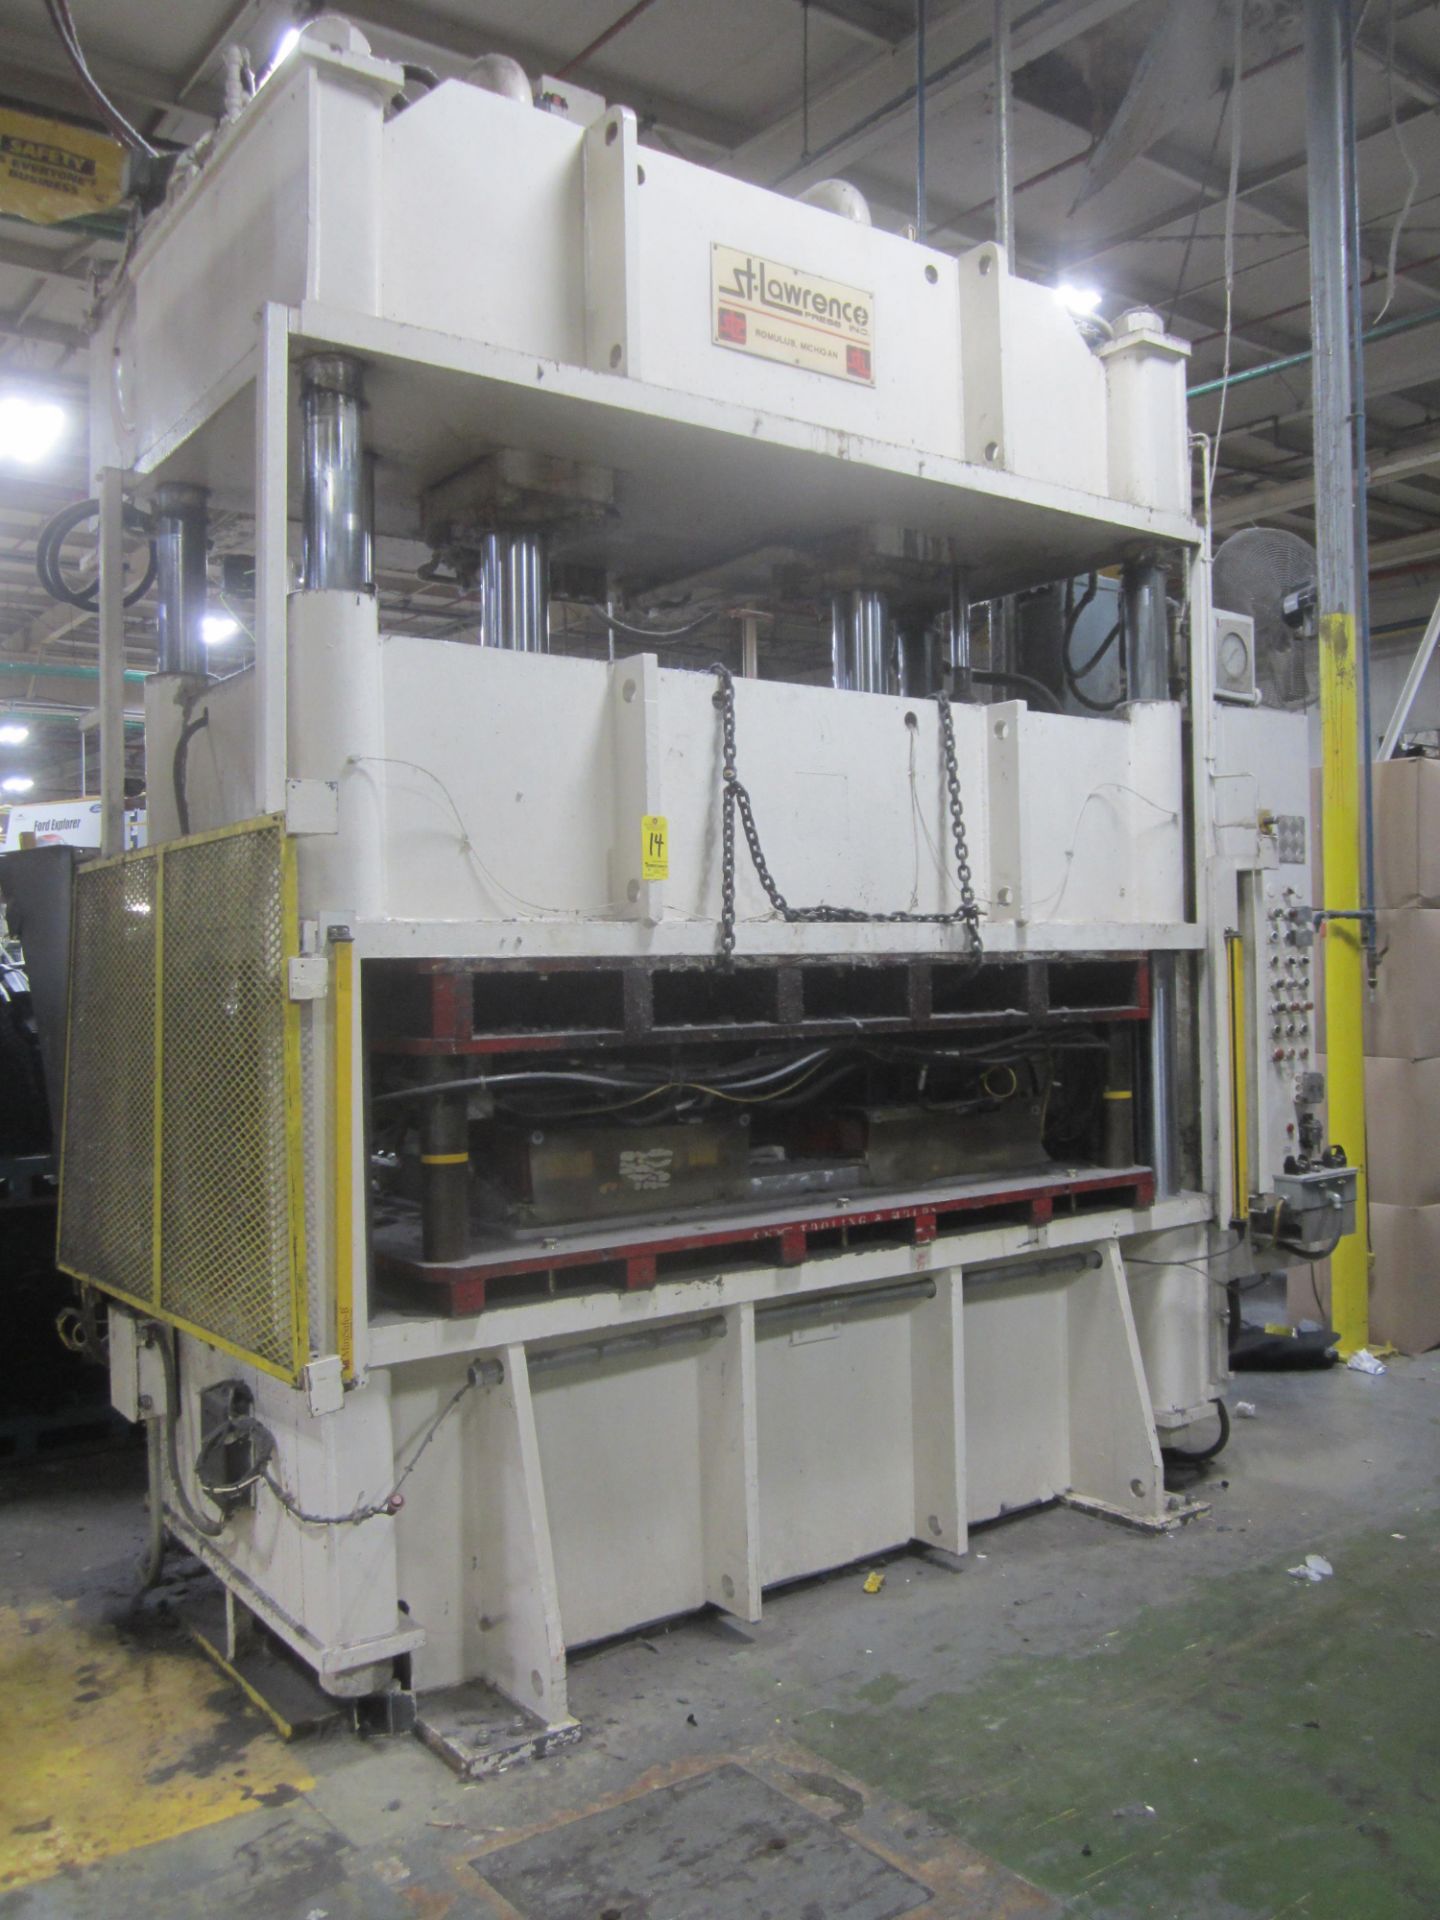 St. Lawrence 100 Ton Hydraulic Press, 4-Post, 114" X 50" Bed and Ram Area, 100" X 36" Between the